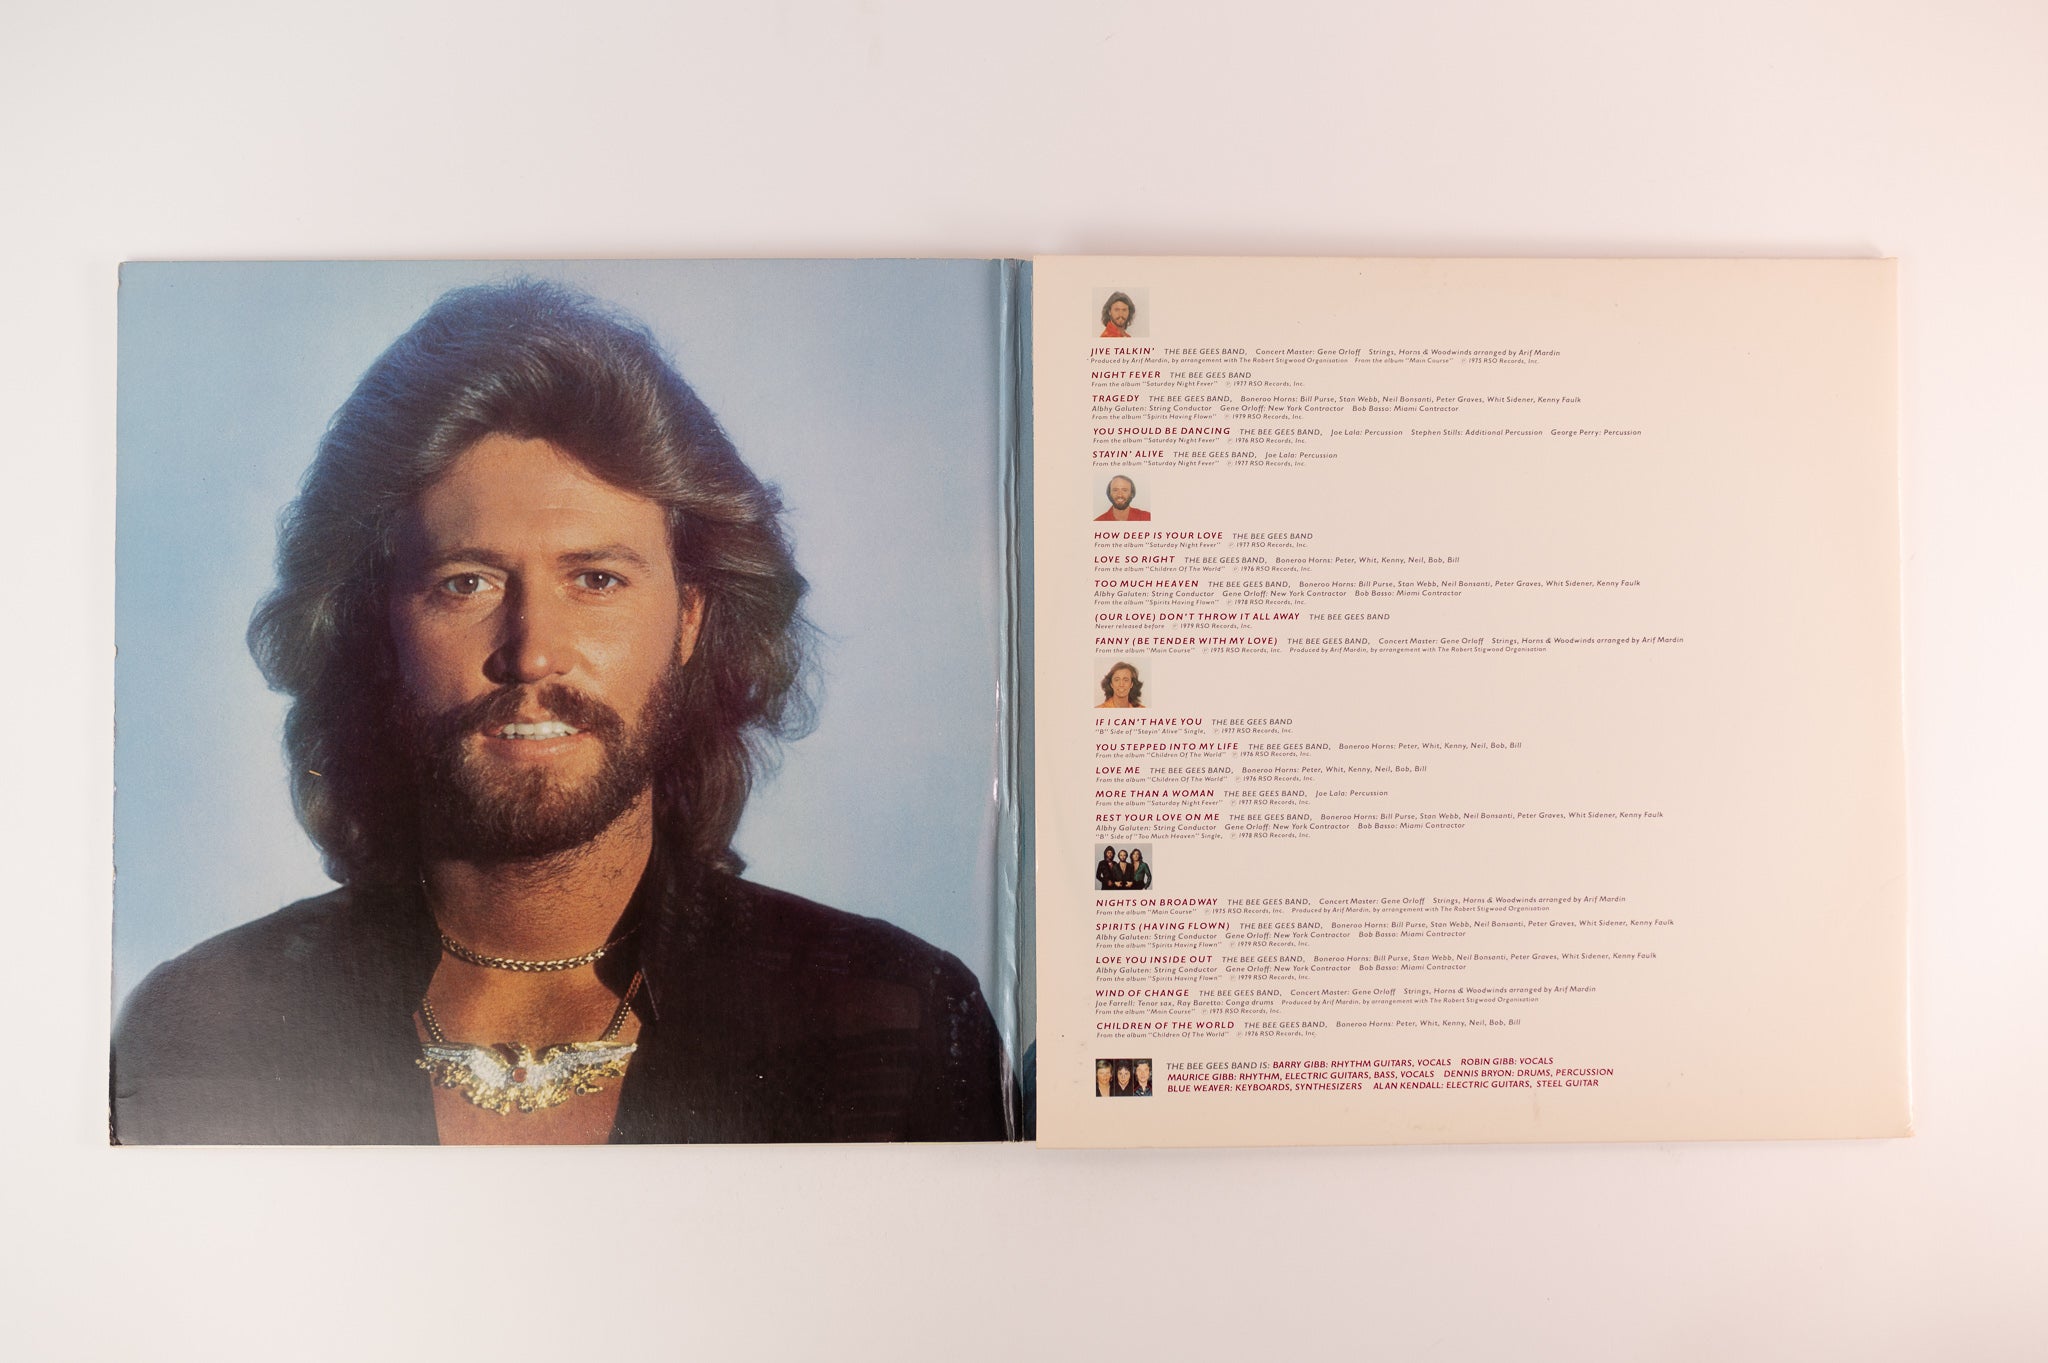 Bee Gees - Greatest on RSO